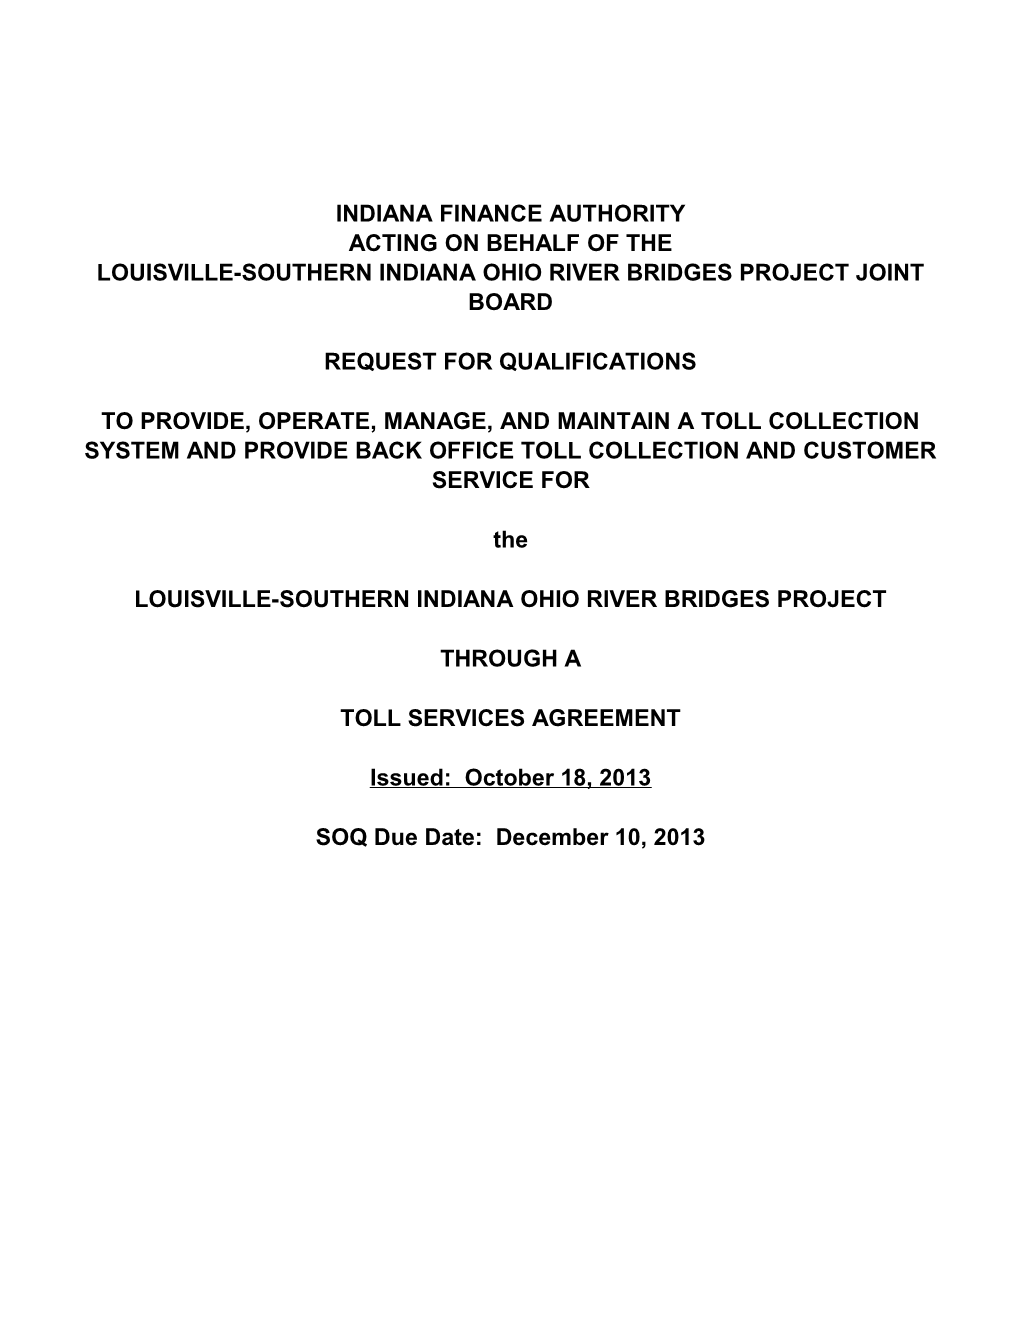 Louisville-Southern Indianaohio River Bridges Project